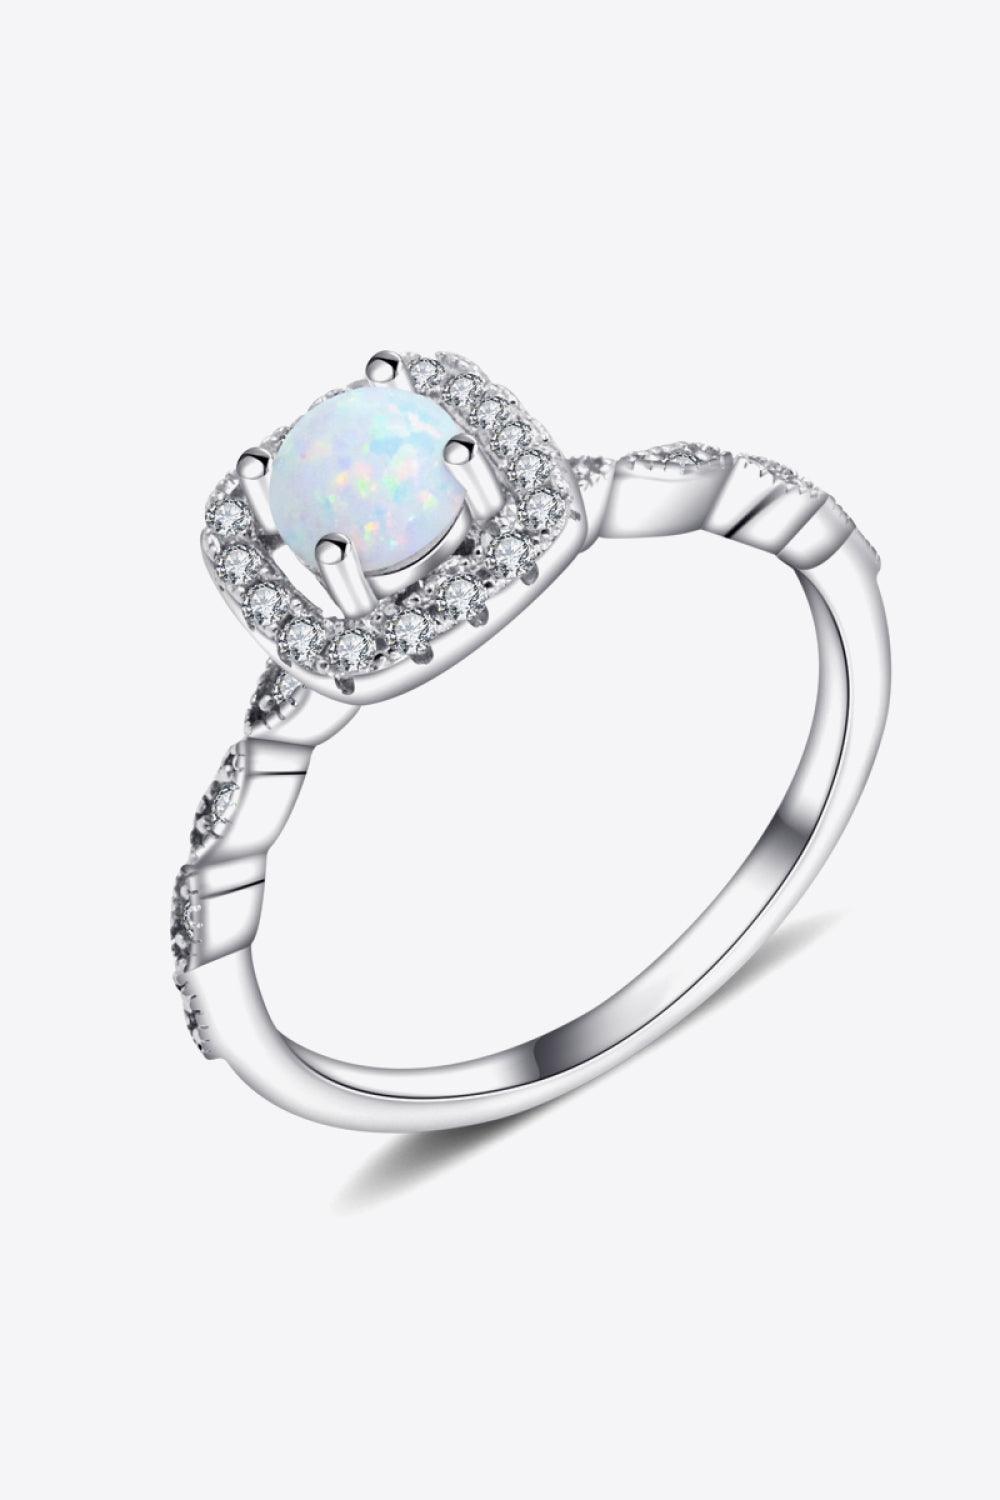 Inlaid Opal Ring - 925 Sterling Silver - Crazy Like a Daisy Boutique #